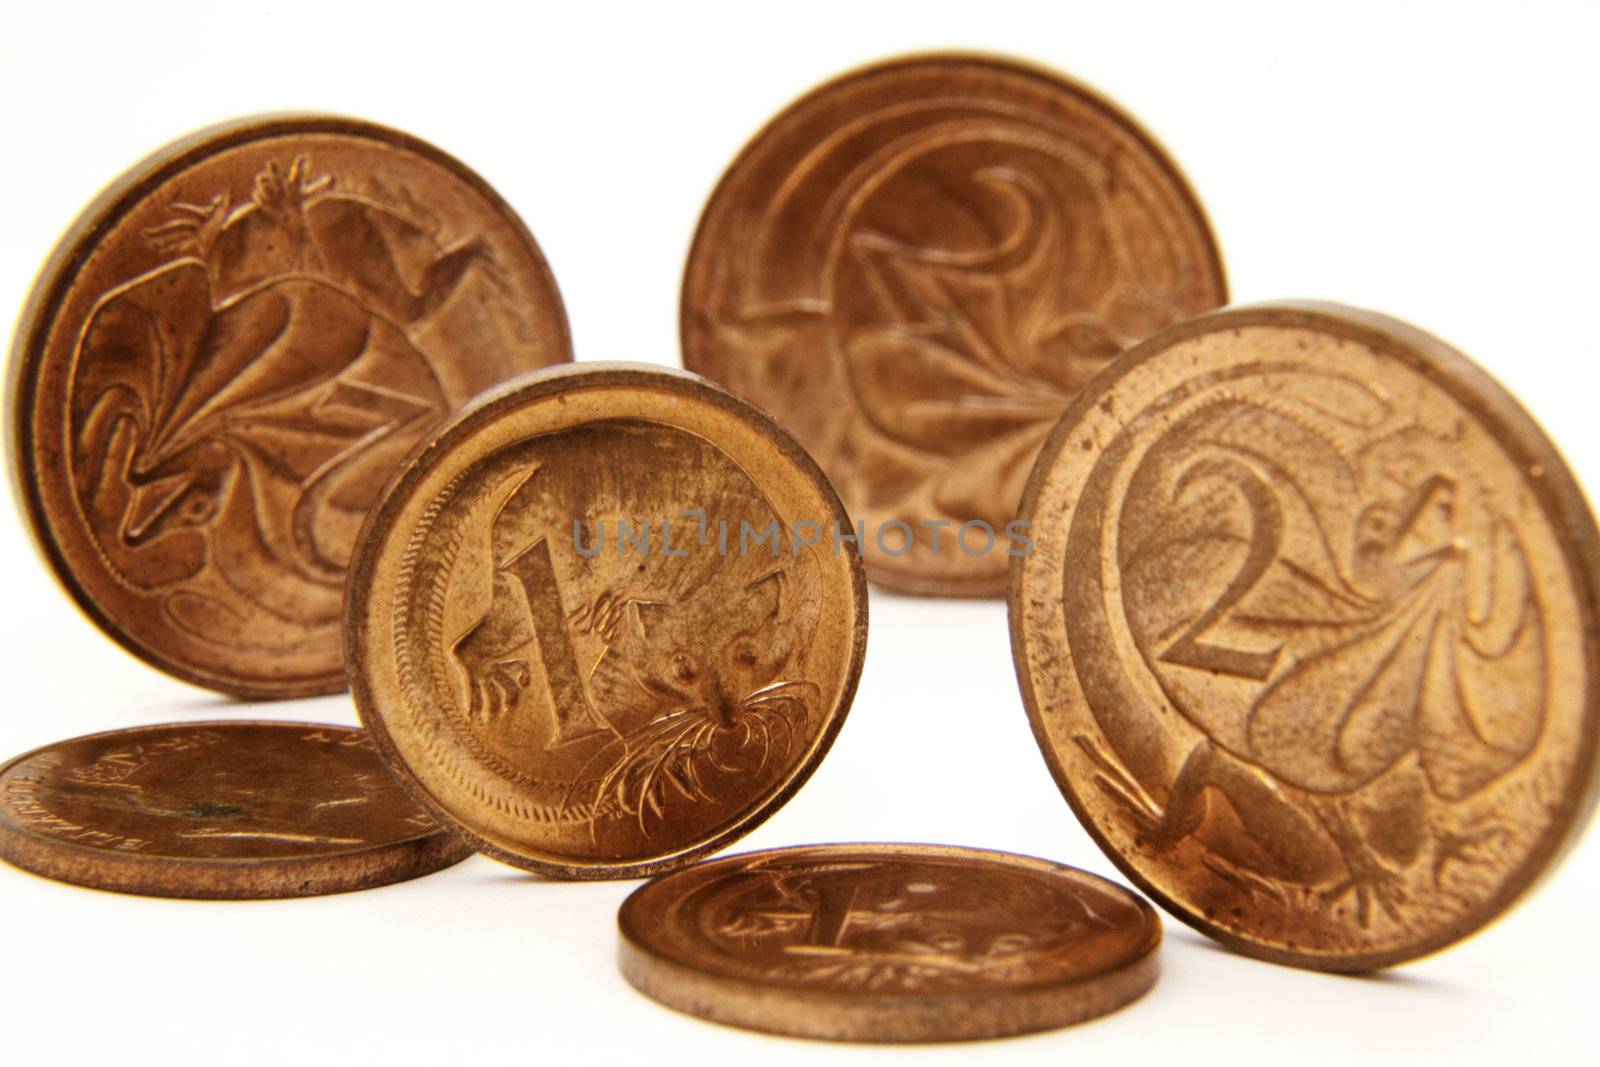 Copper coins by monkeystock